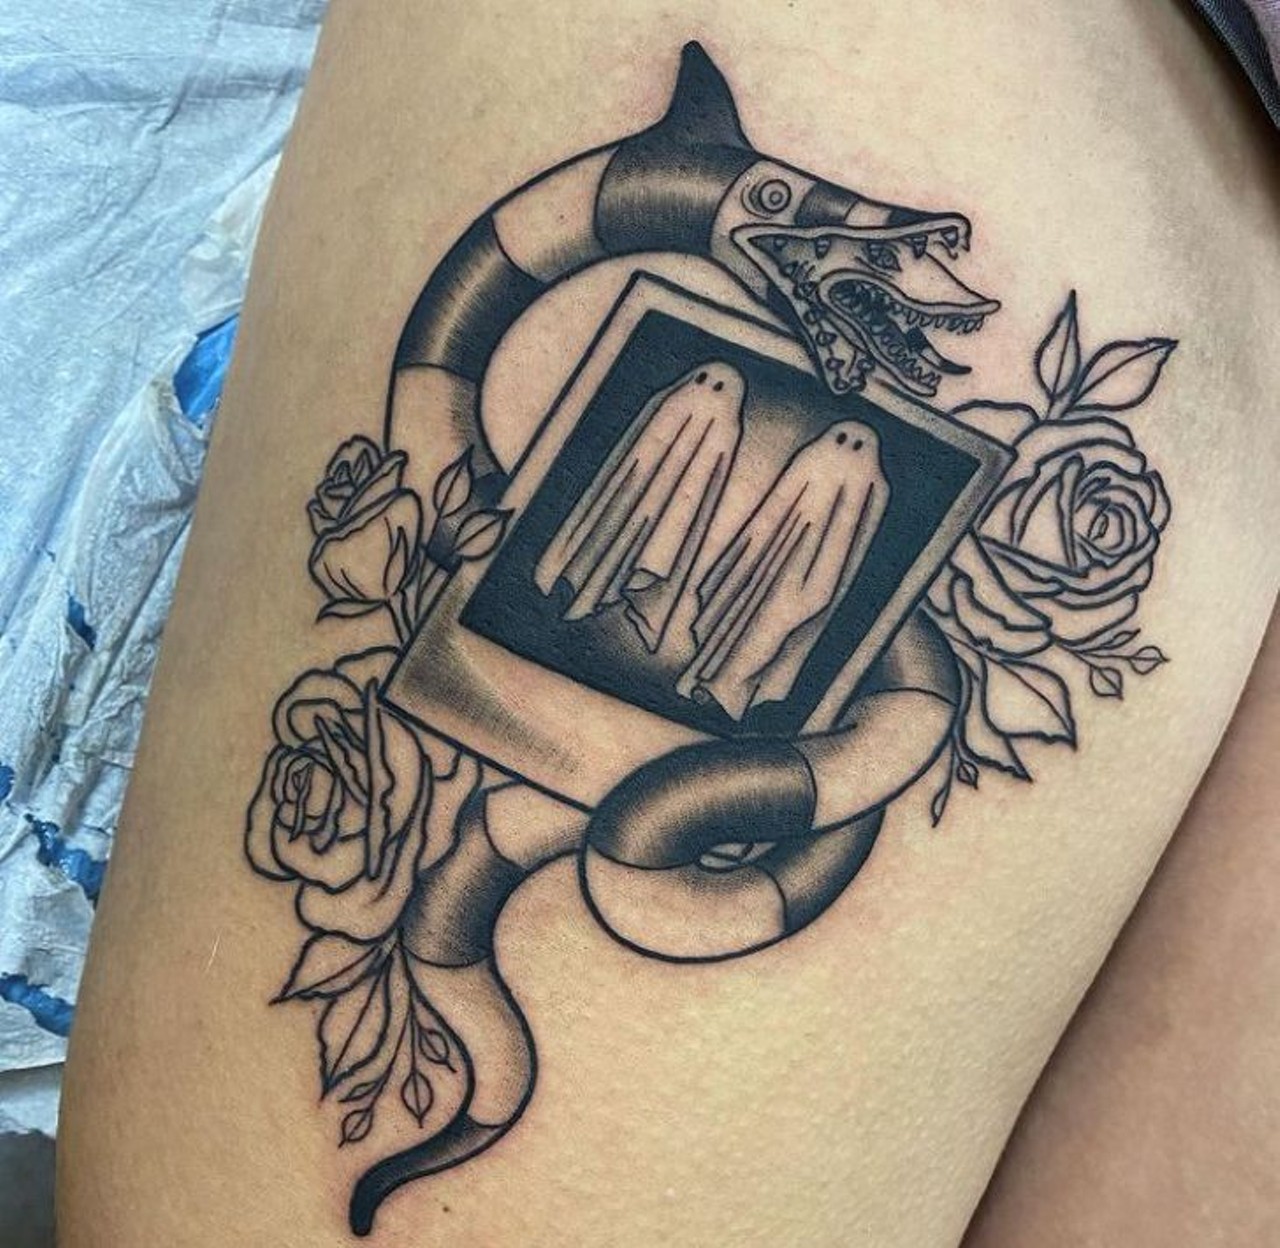 Dee Florian 
Homesick Tattoo Studio & Gallery
3050 Alafaya Trail, Oviedo, 407-542-3412
Dee Florian&#146;s ultra-detailed work is perfect for all blackwork or colorful tattoos. She&#146;s currently working out of Homesick Tattoo Studio & Gallery. 
Photo via deefloriantattoos/Instagram